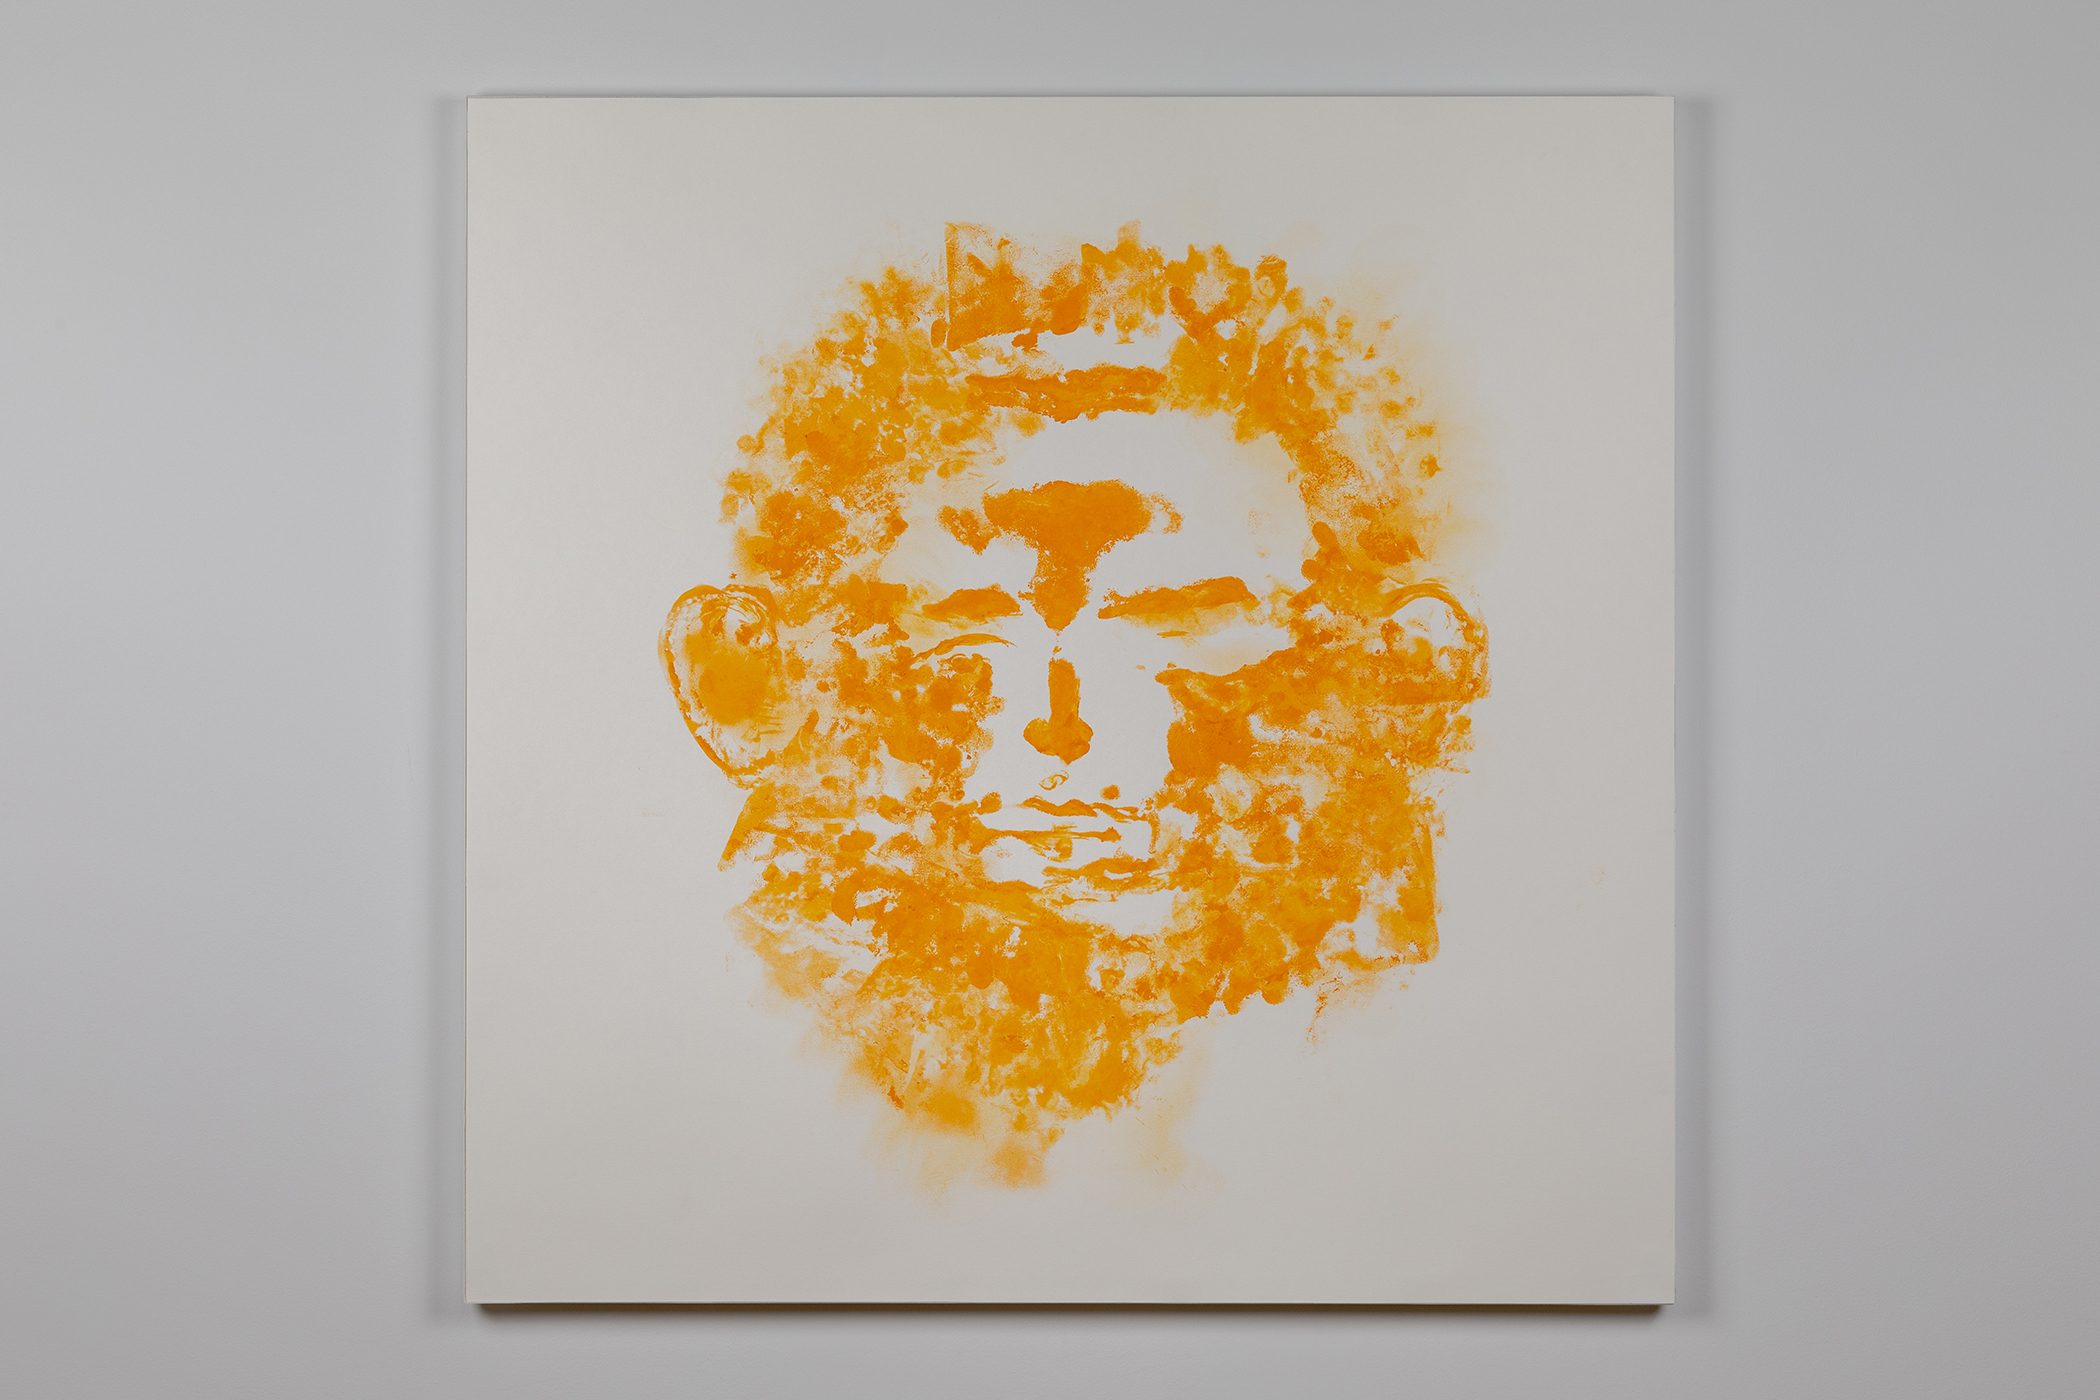 Impression (Yellow Face); Oil-based ink on paper, mounted on archival mat board and Gatorboard; 30” x 30”